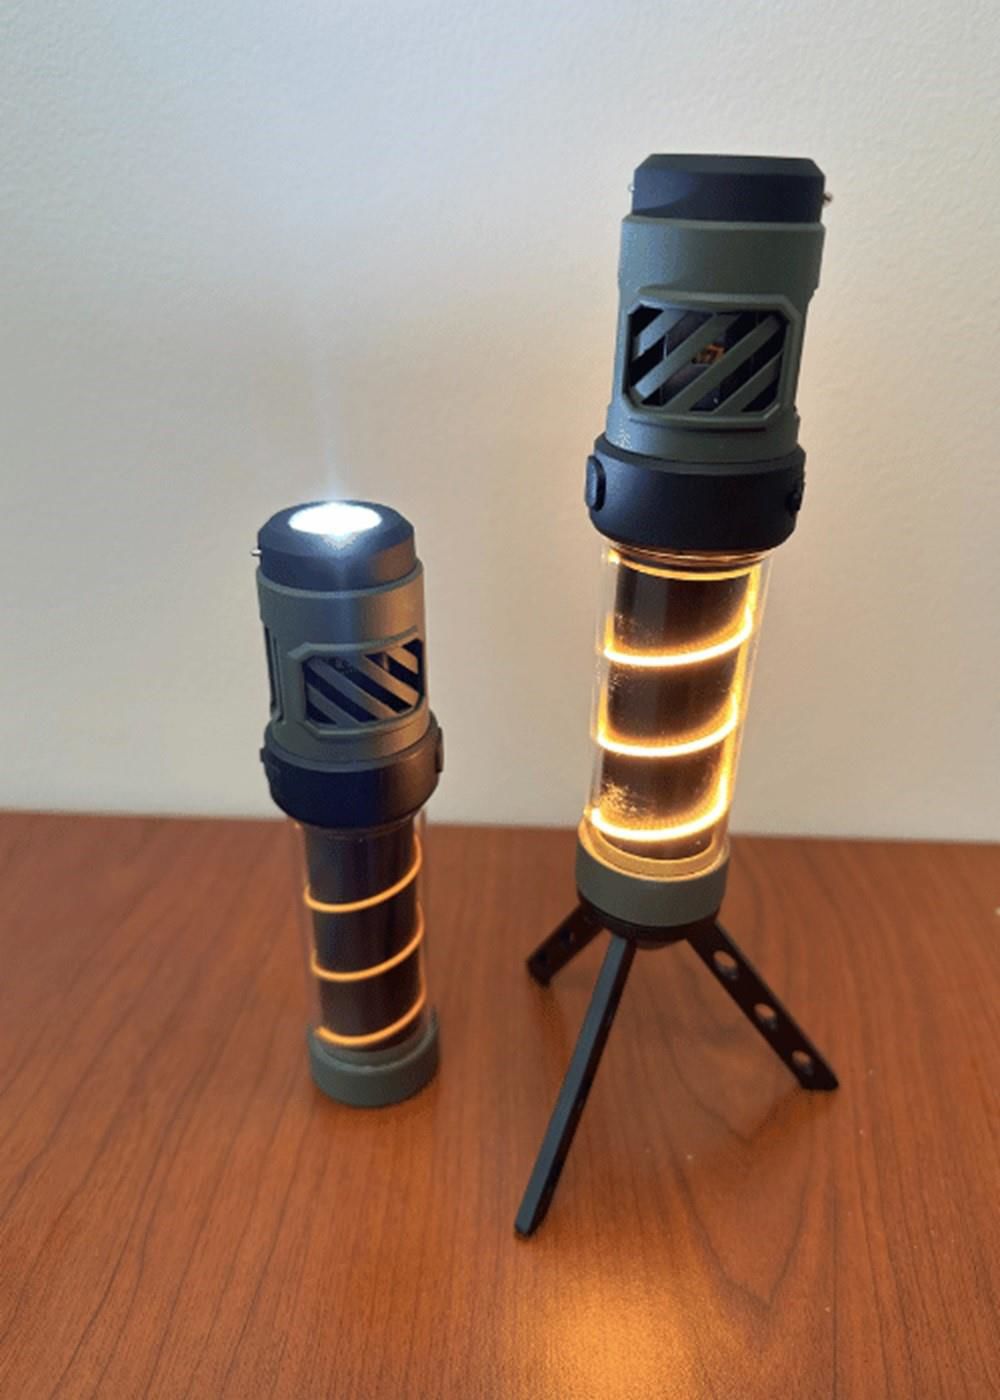 Mozz Guard Reviews (BUG ZAPPER PLUG IN): Don’t Buy Mozz Guard Mosquito Zapper Till You Read This.